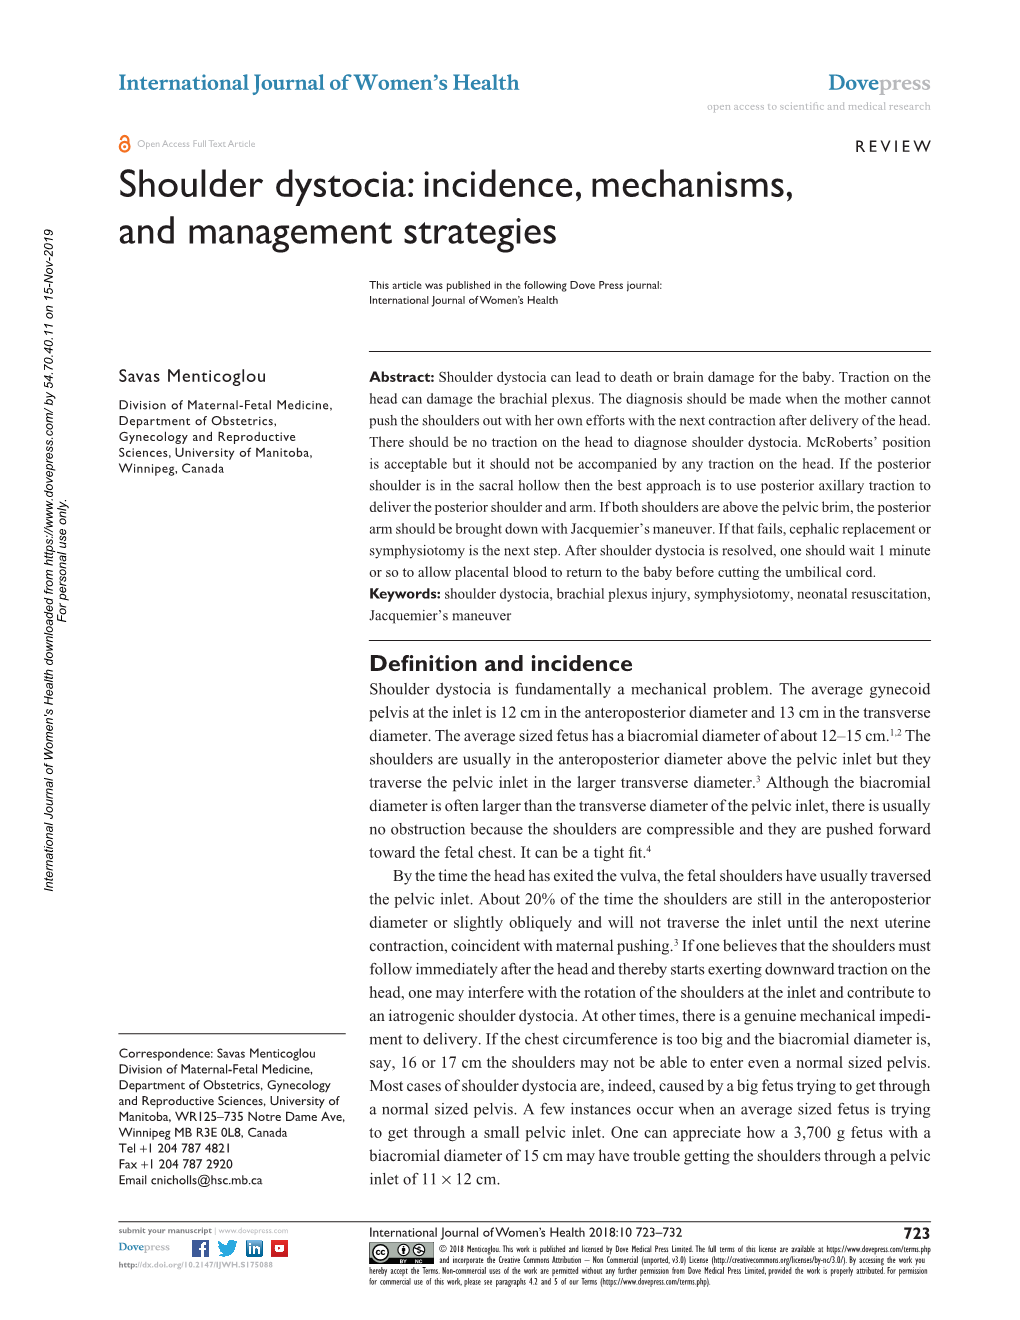 Shoulder Dystocia Open Access to Scientific and Medical Research DOI: 175088